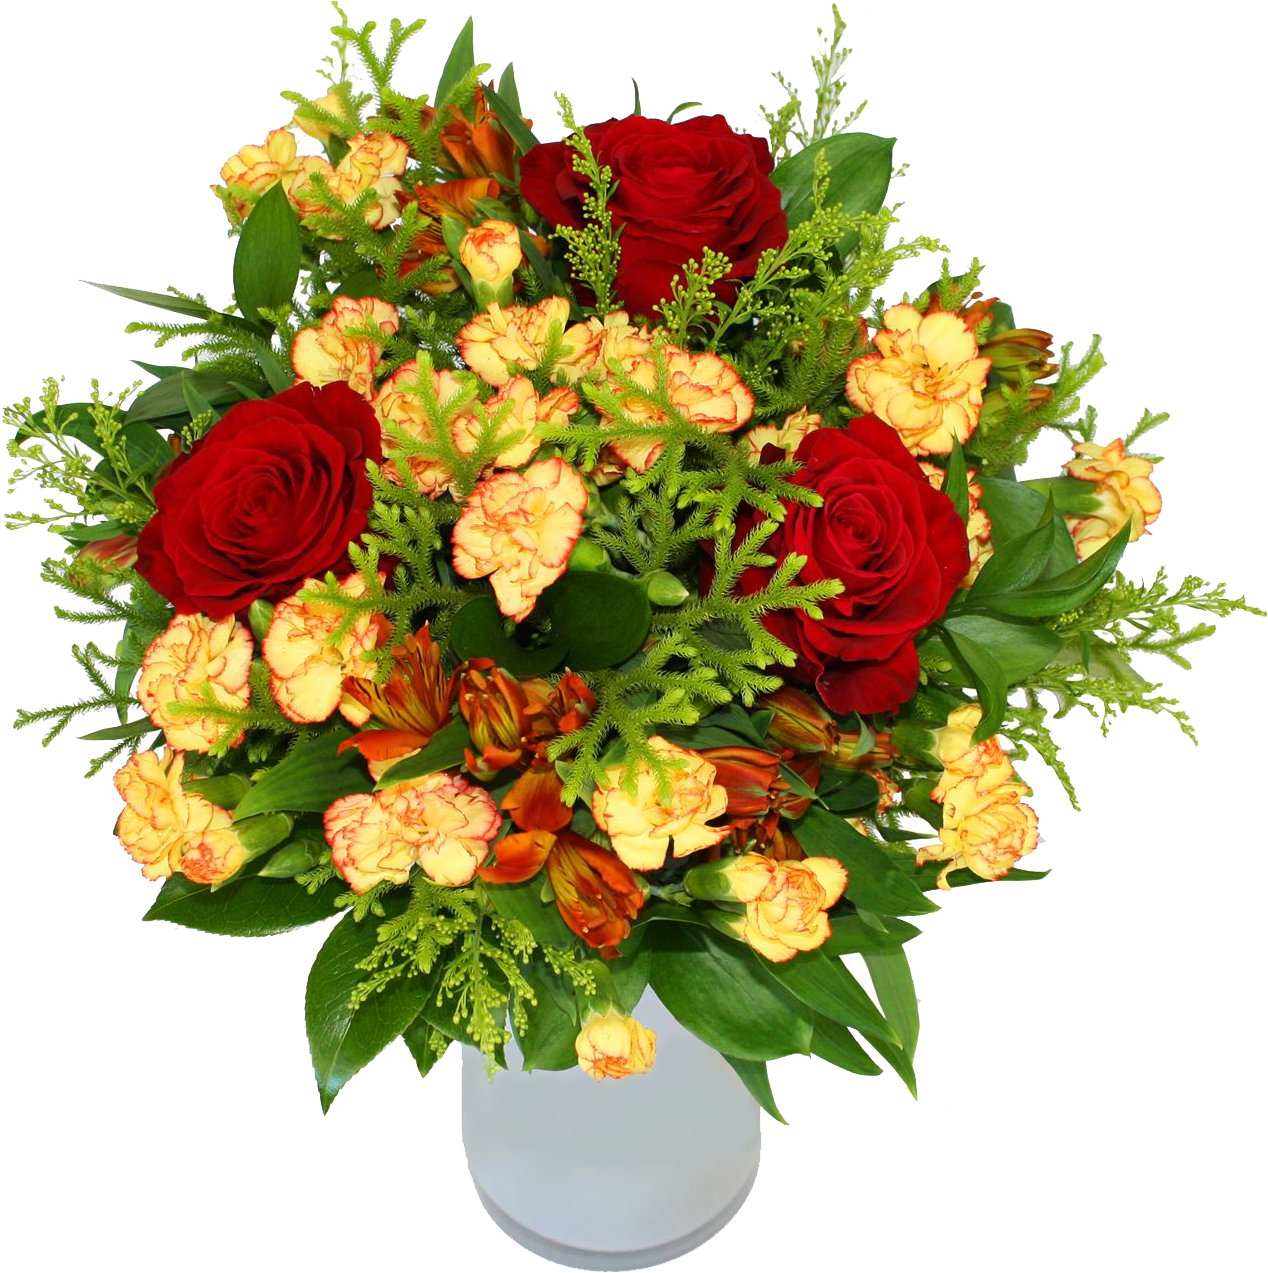 A Bouquet Of Flowers In A Vase